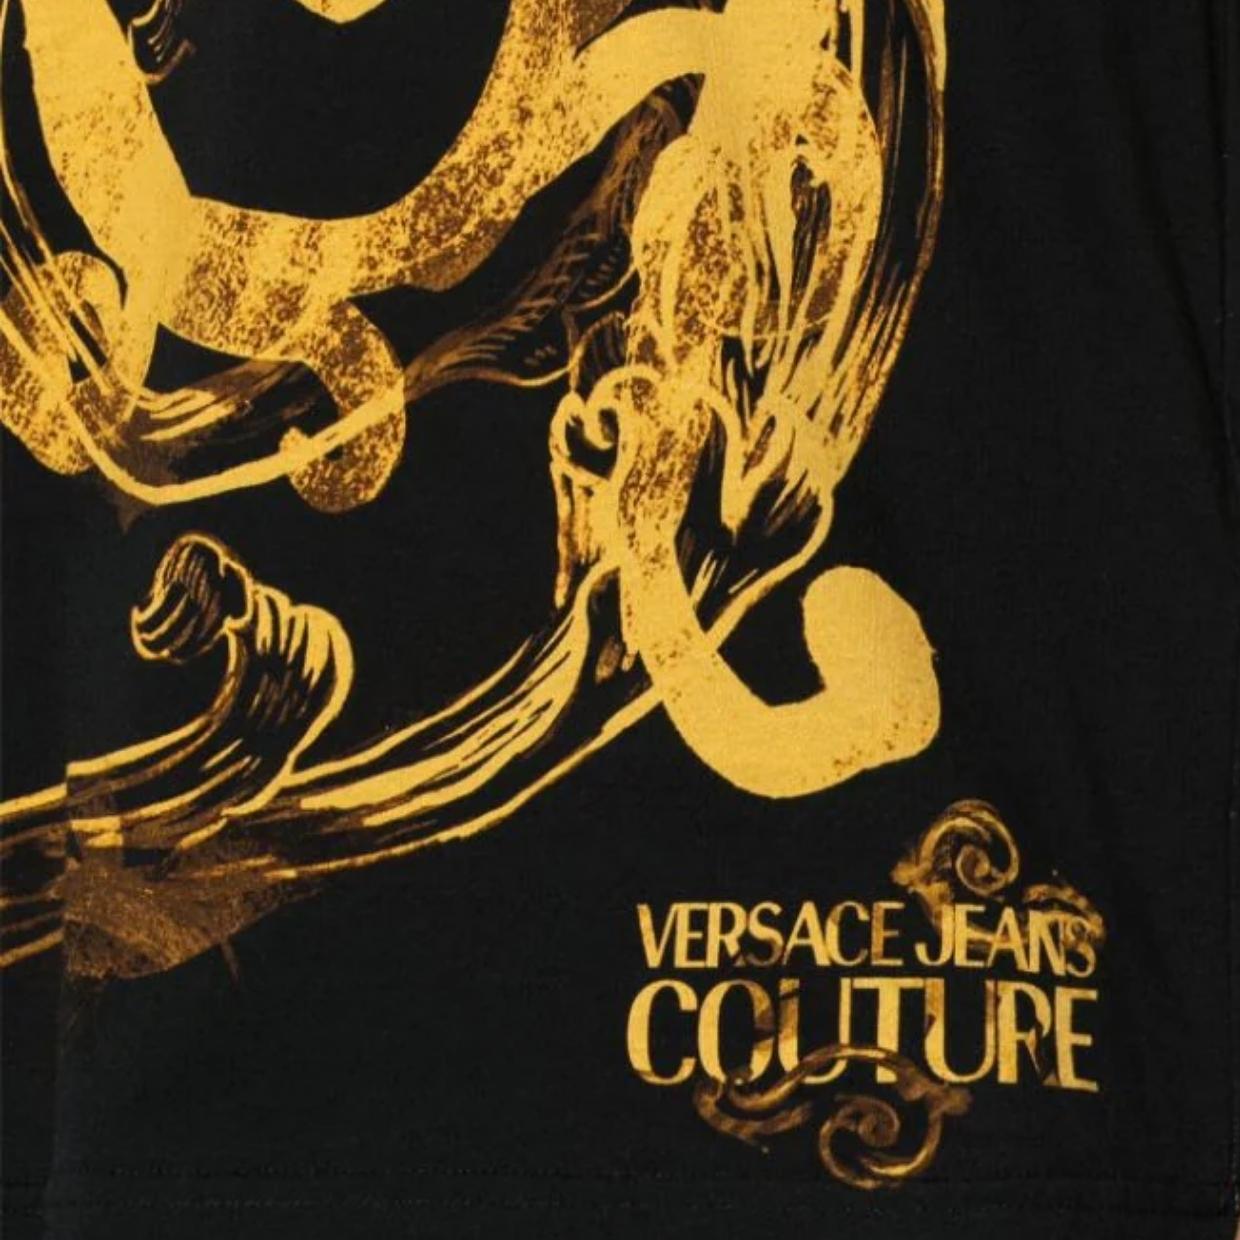 Versace Jeans Couture Baroque Printed Black T-Shirt